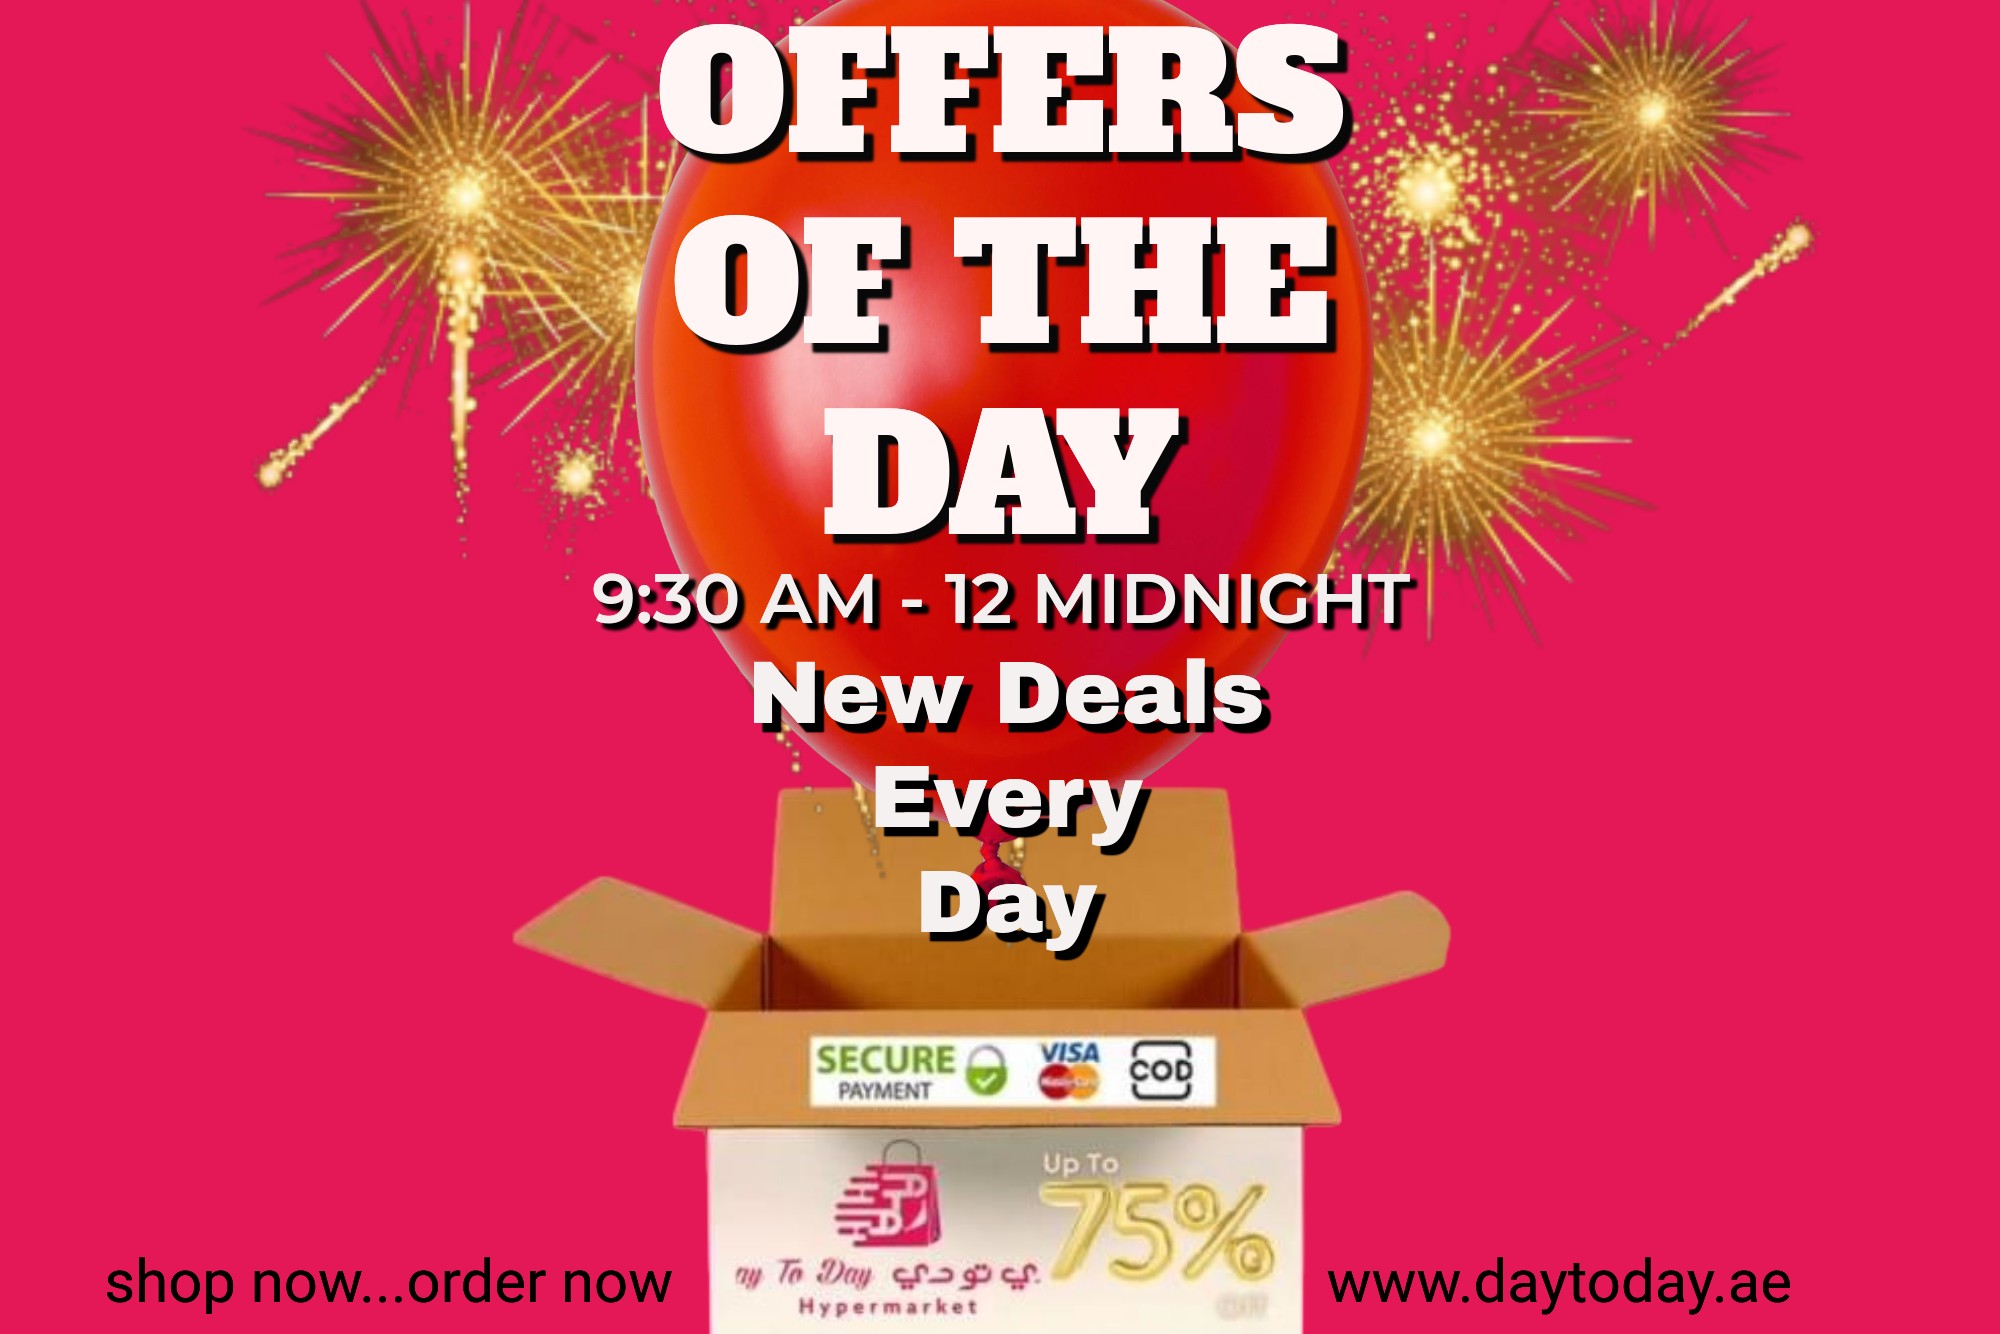 BEST OF THE BEST OFFER AT DAYTODAY.AE